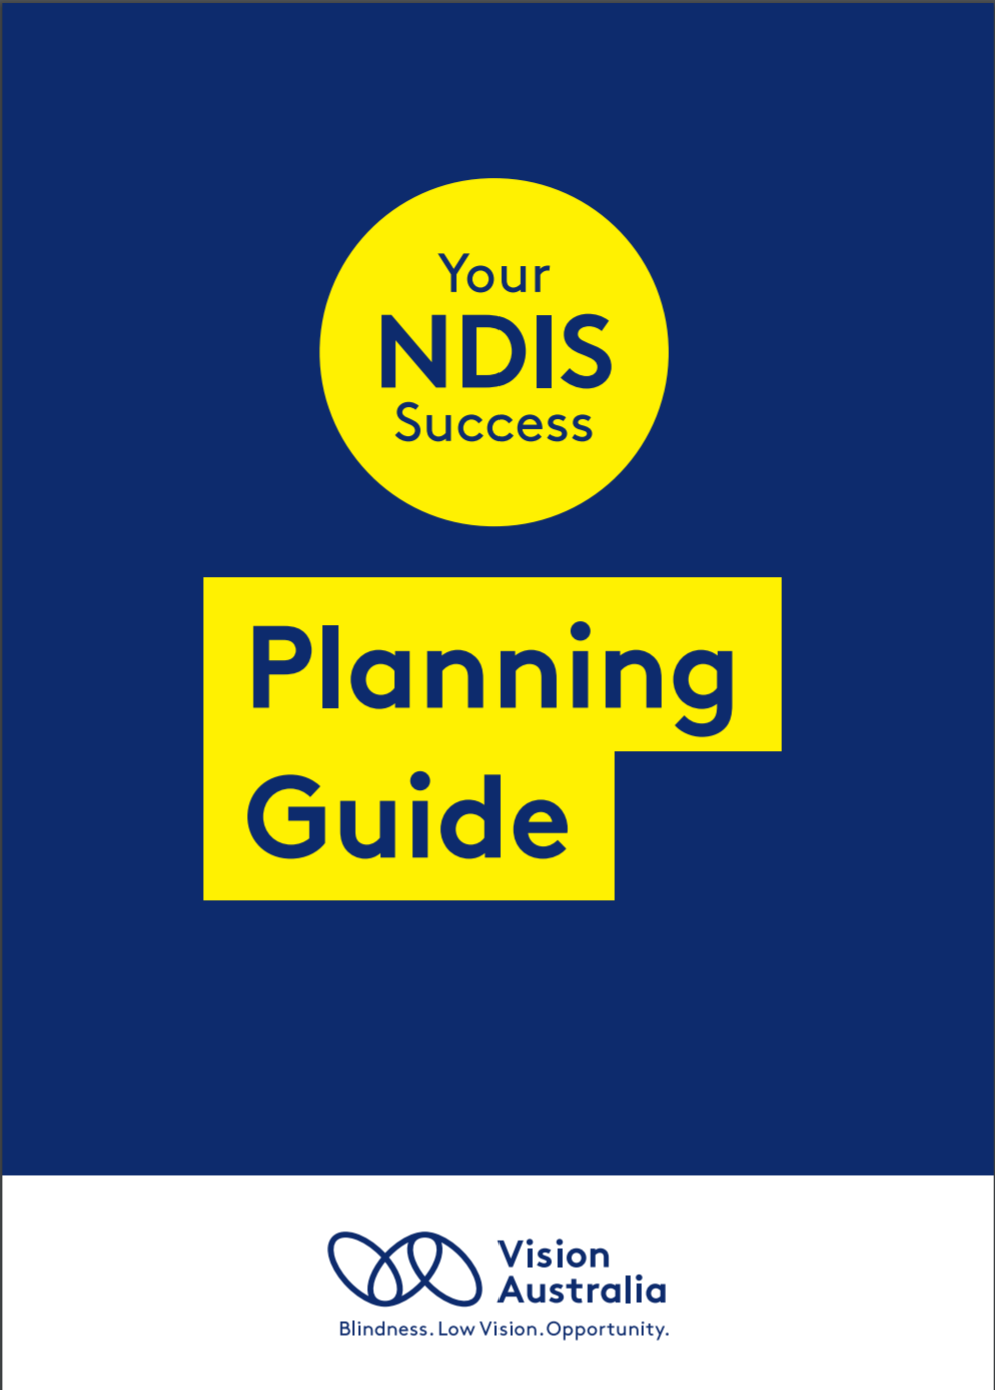 Front cover of the 'Your NDIS Success: Planning Guide' booklet